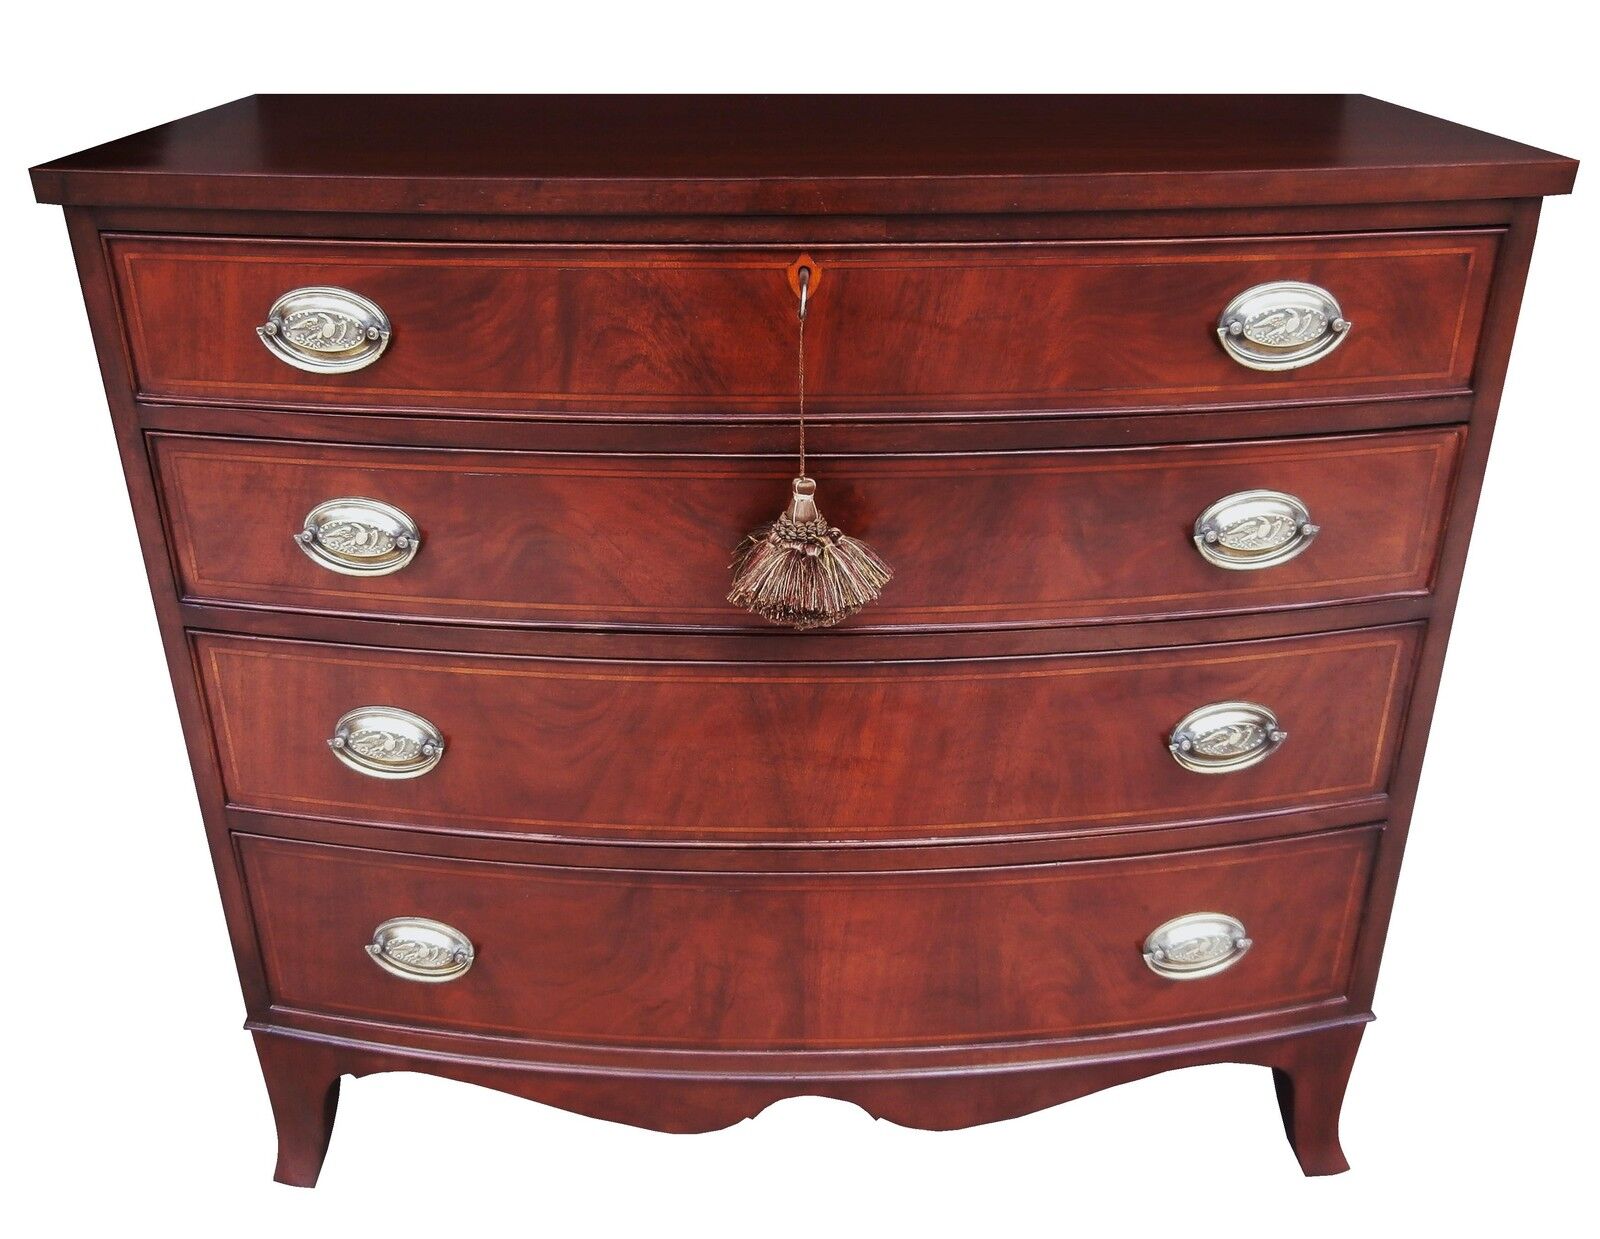 AMERICAN FEDERAL FLAME MAHOGANY INLAID GEORGIAN BOWFRONT CHEST COMMODE DRESSER 